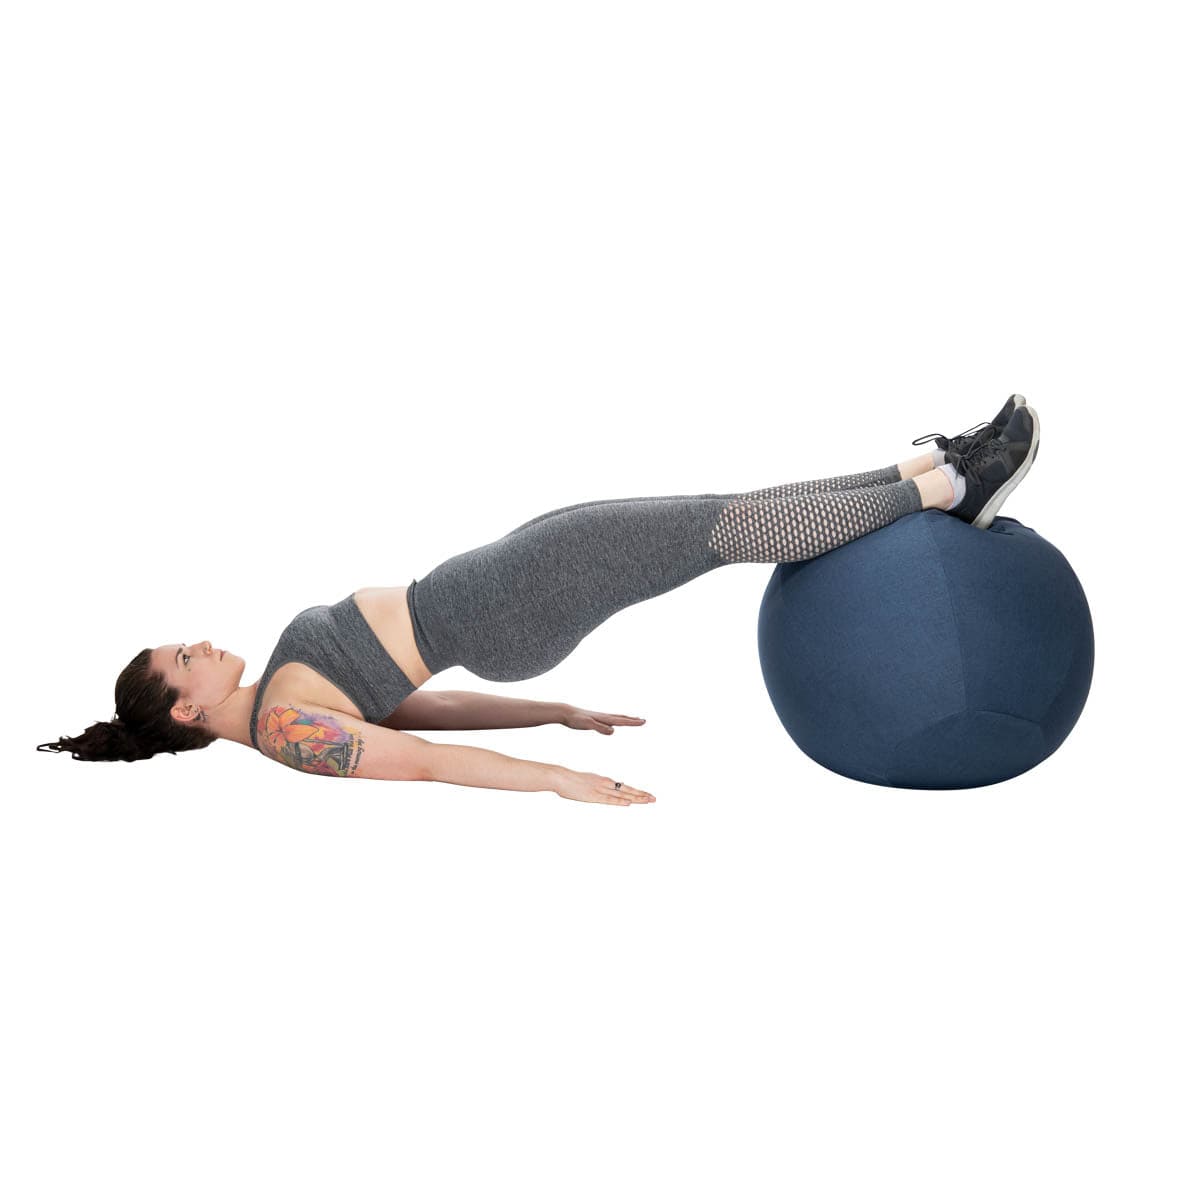 Exerfit Yogi Ball with Fabric Cover navy with girl lying on it